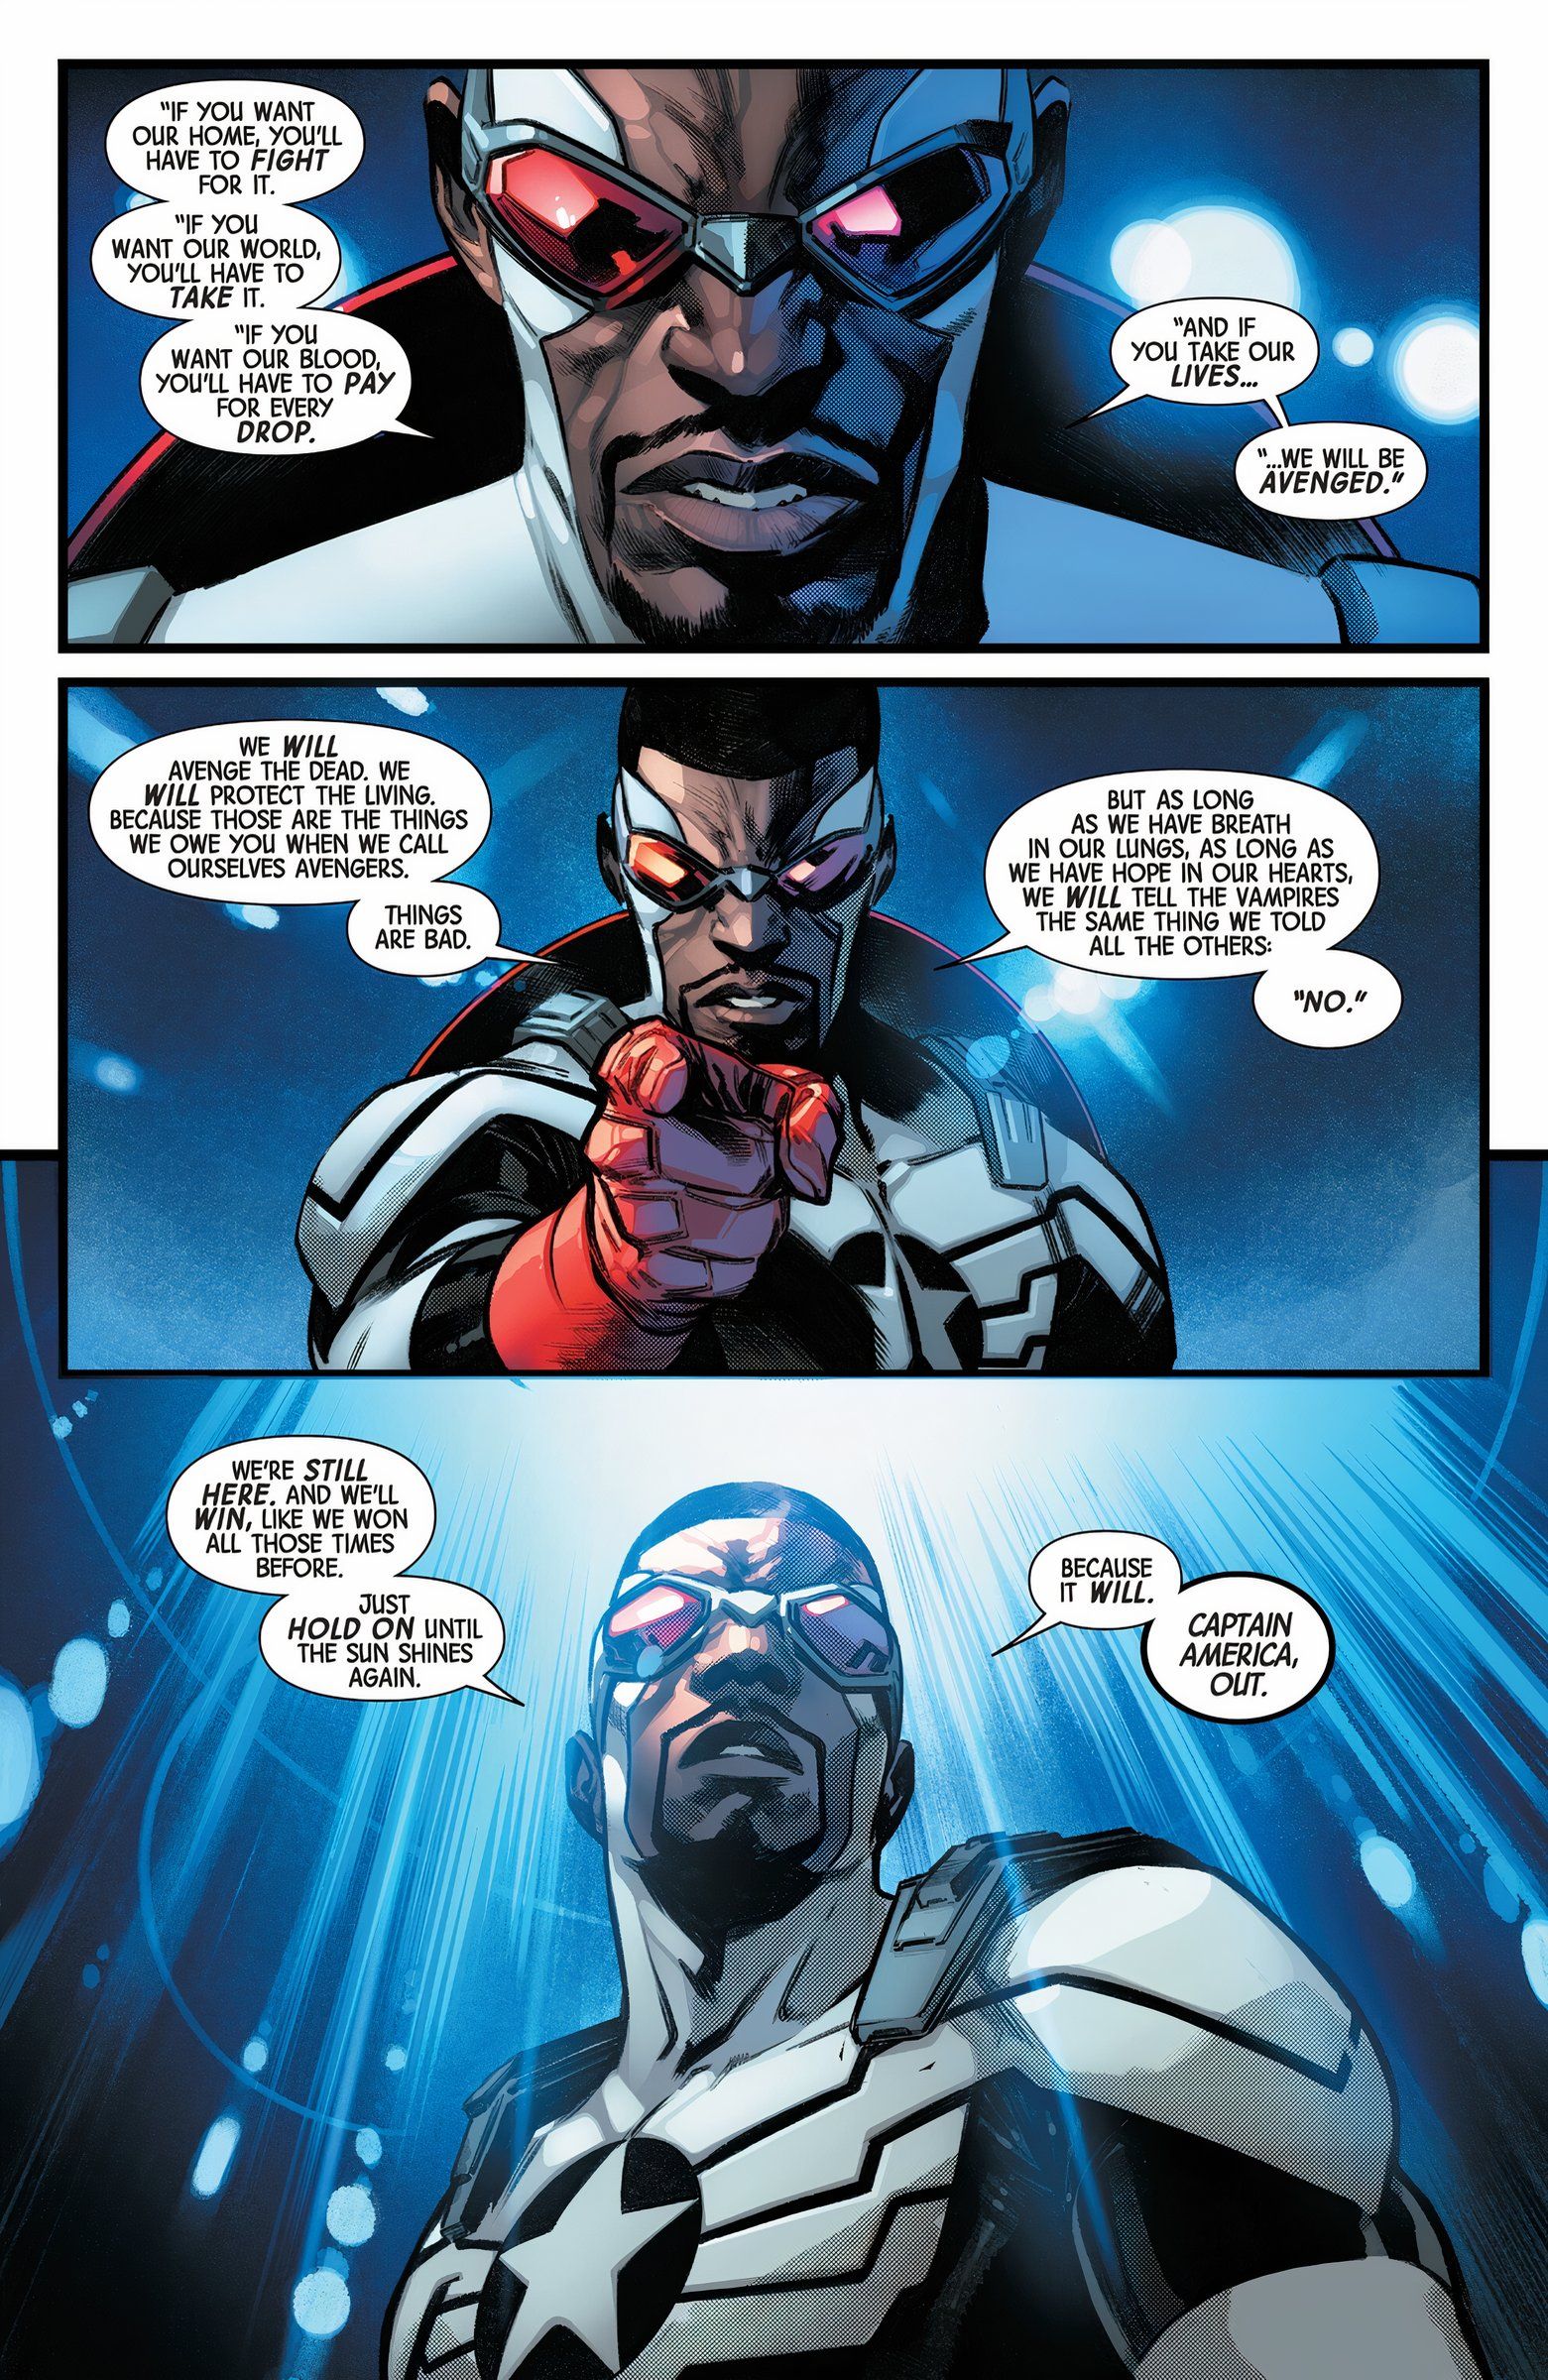 Three panels of Sam Wilson Captain America rallying the troops